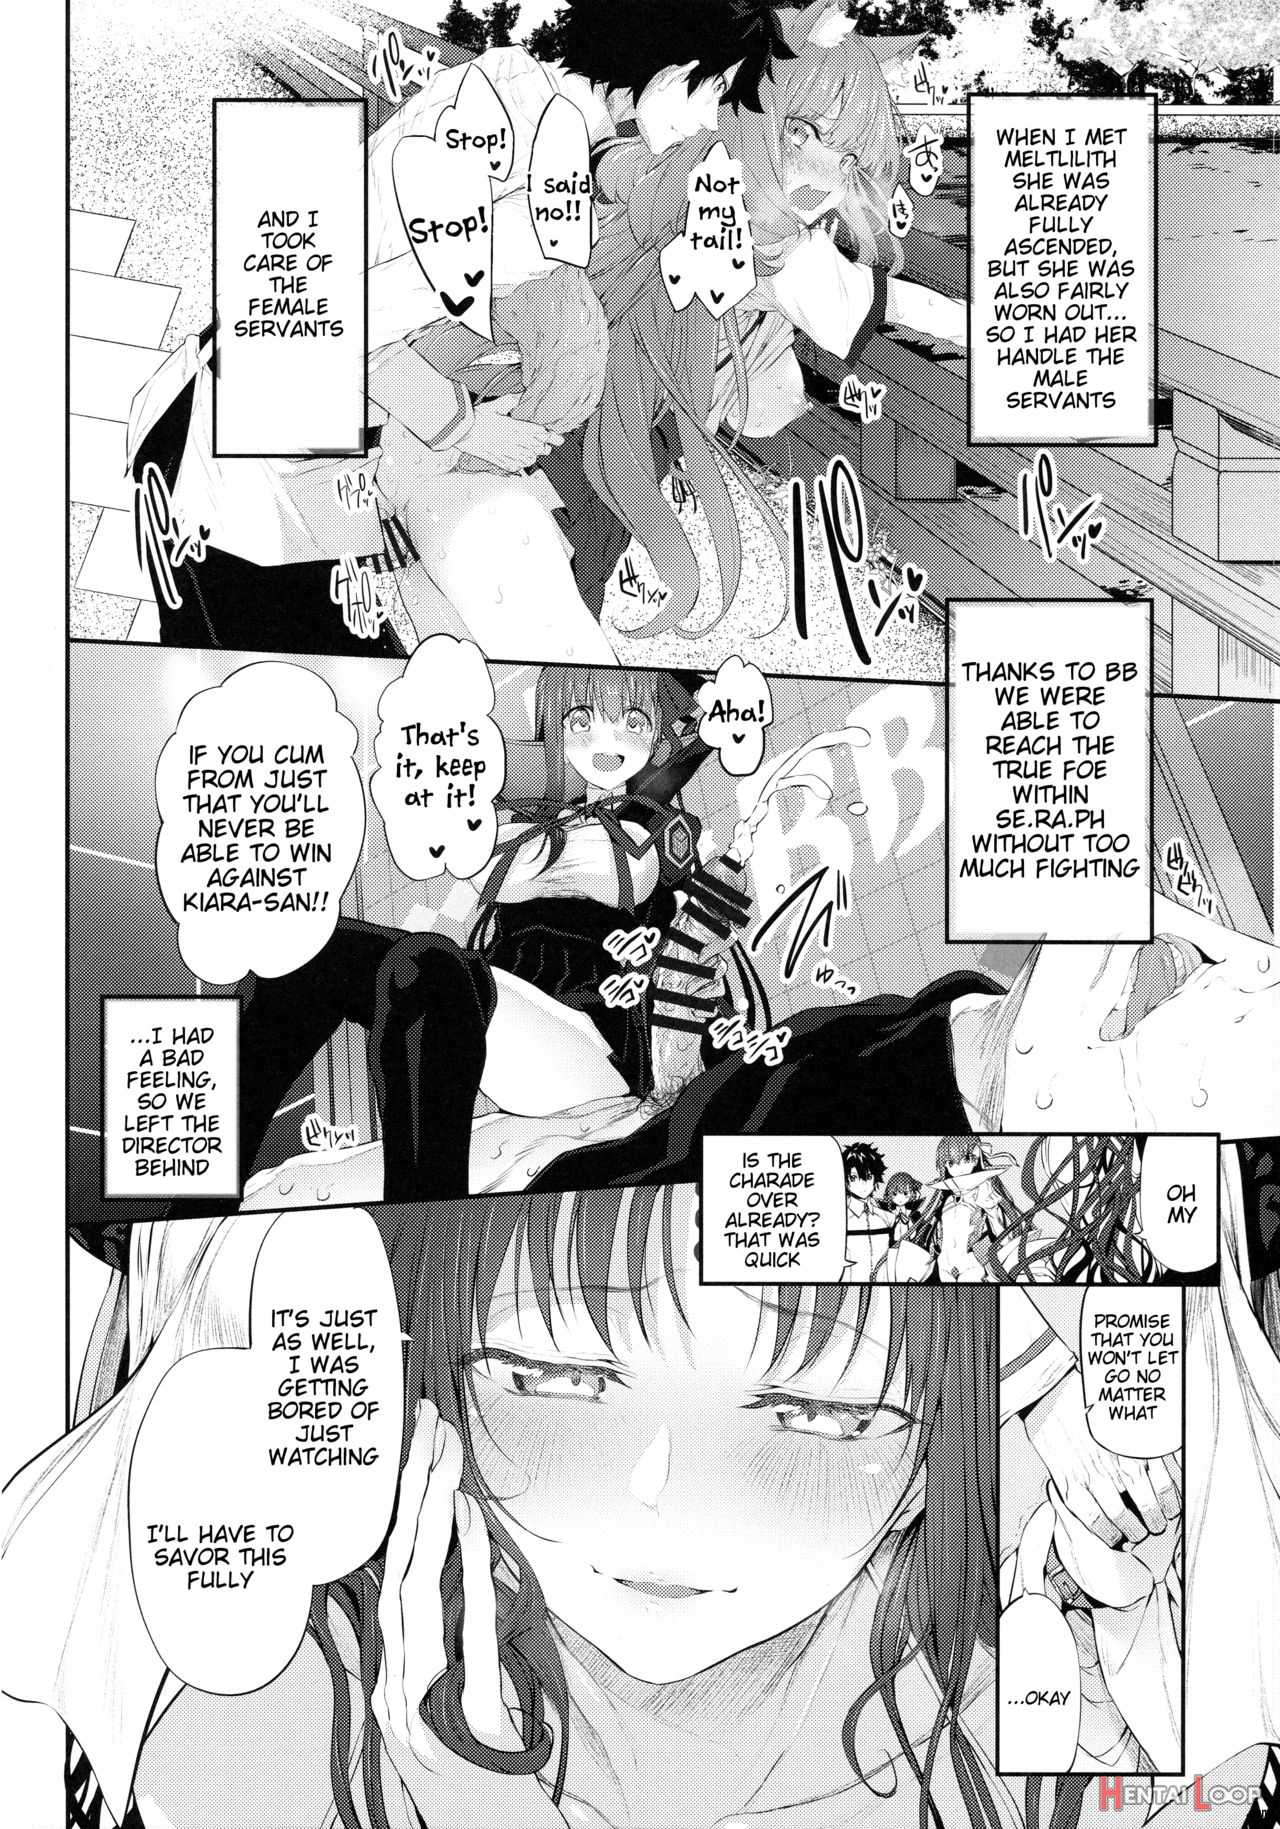 Marked Girls Vol. 15 page 4